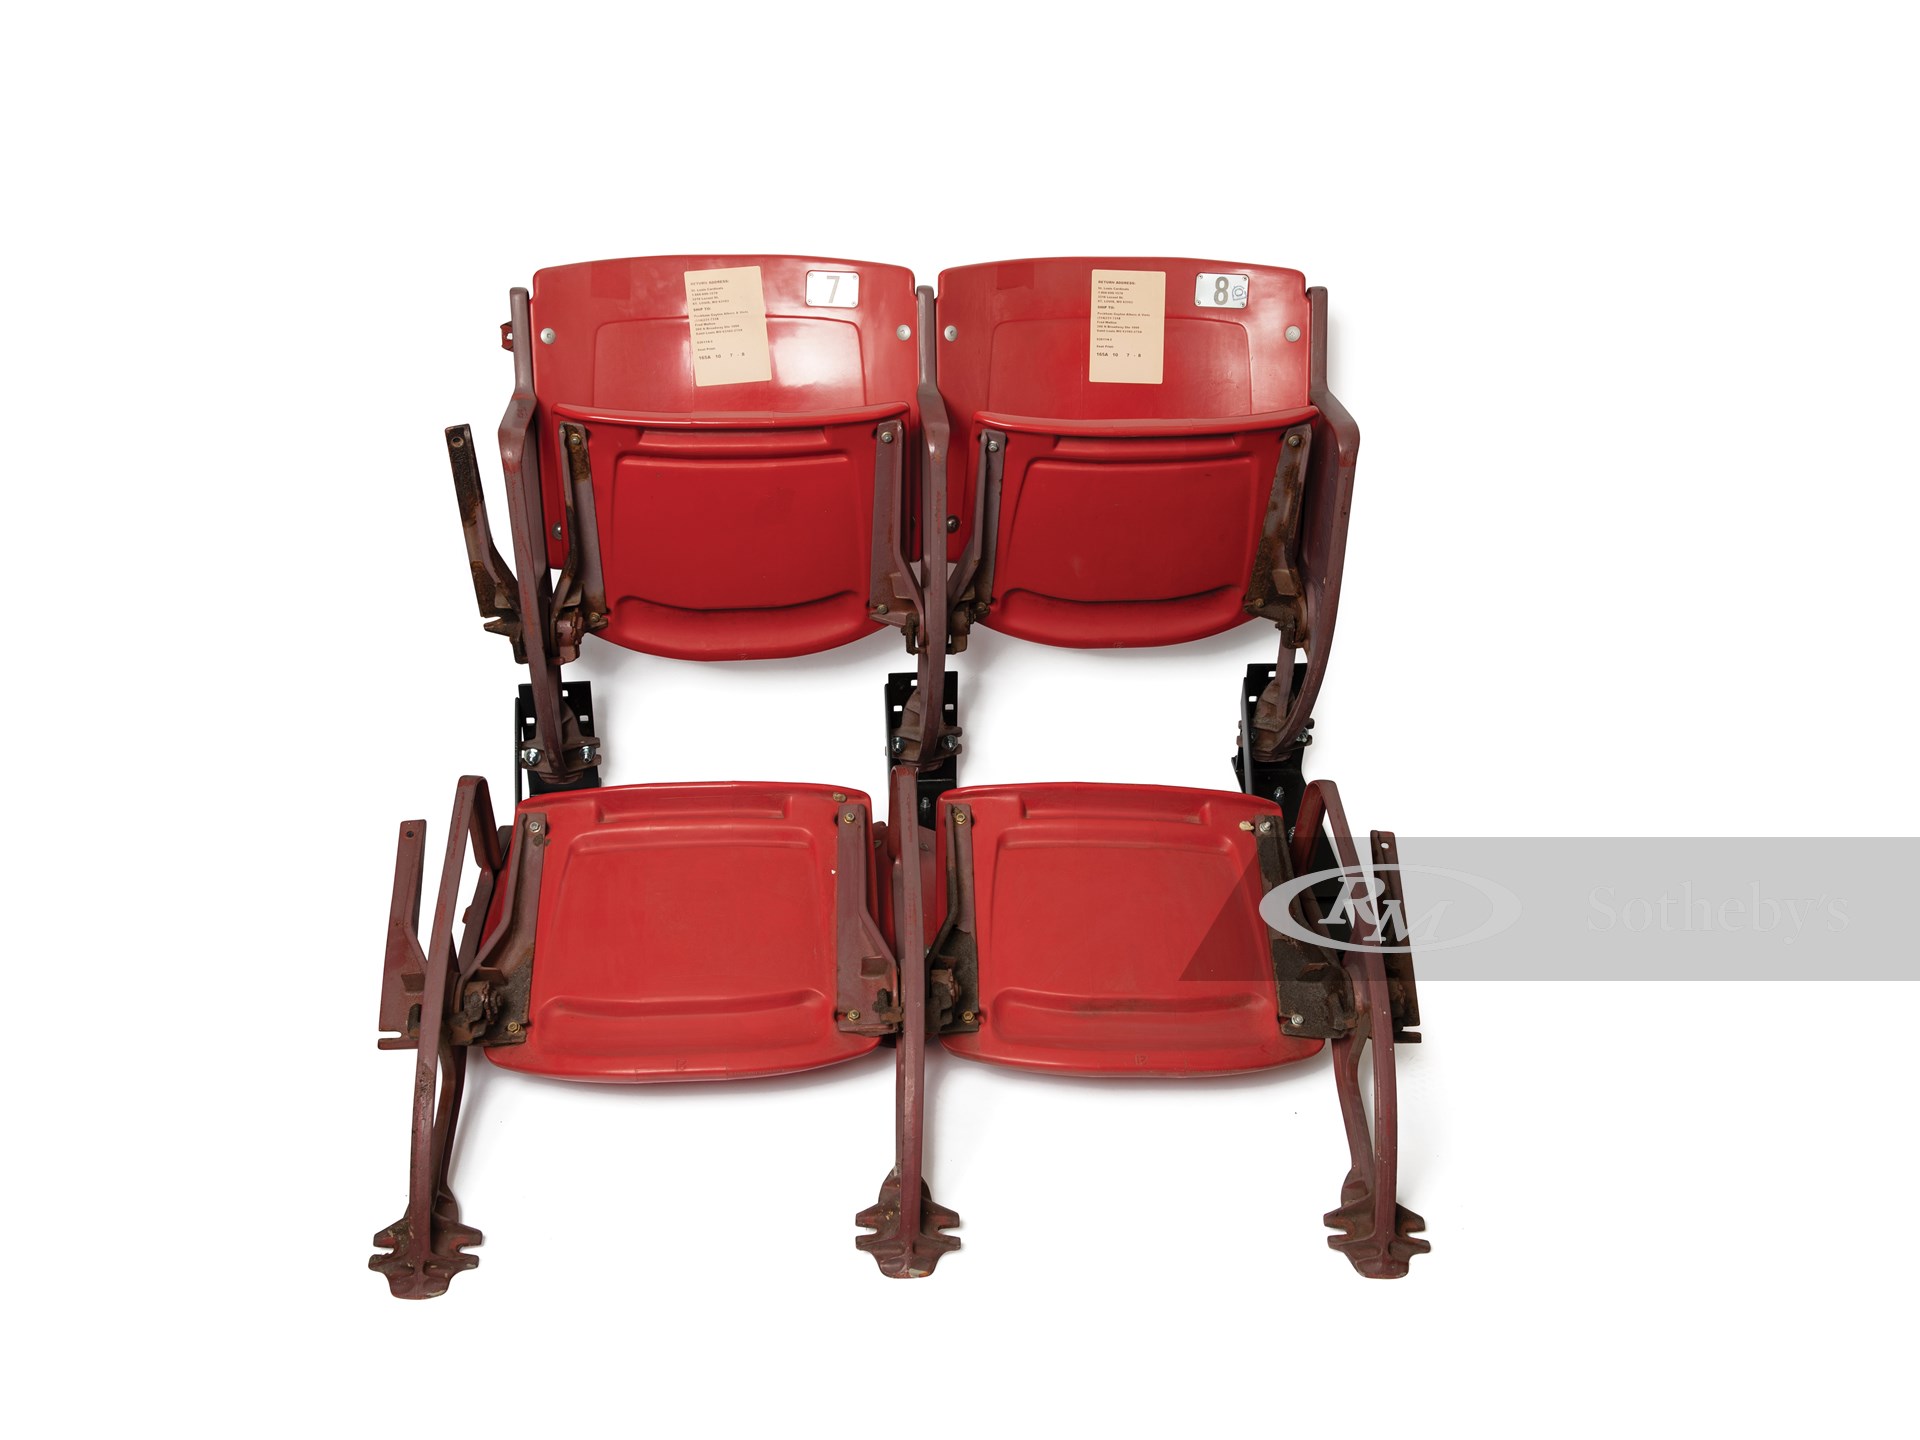 St. Louis Cardinals Stadium Seats | The Guyton Collection | RM Sotheby&#39;s